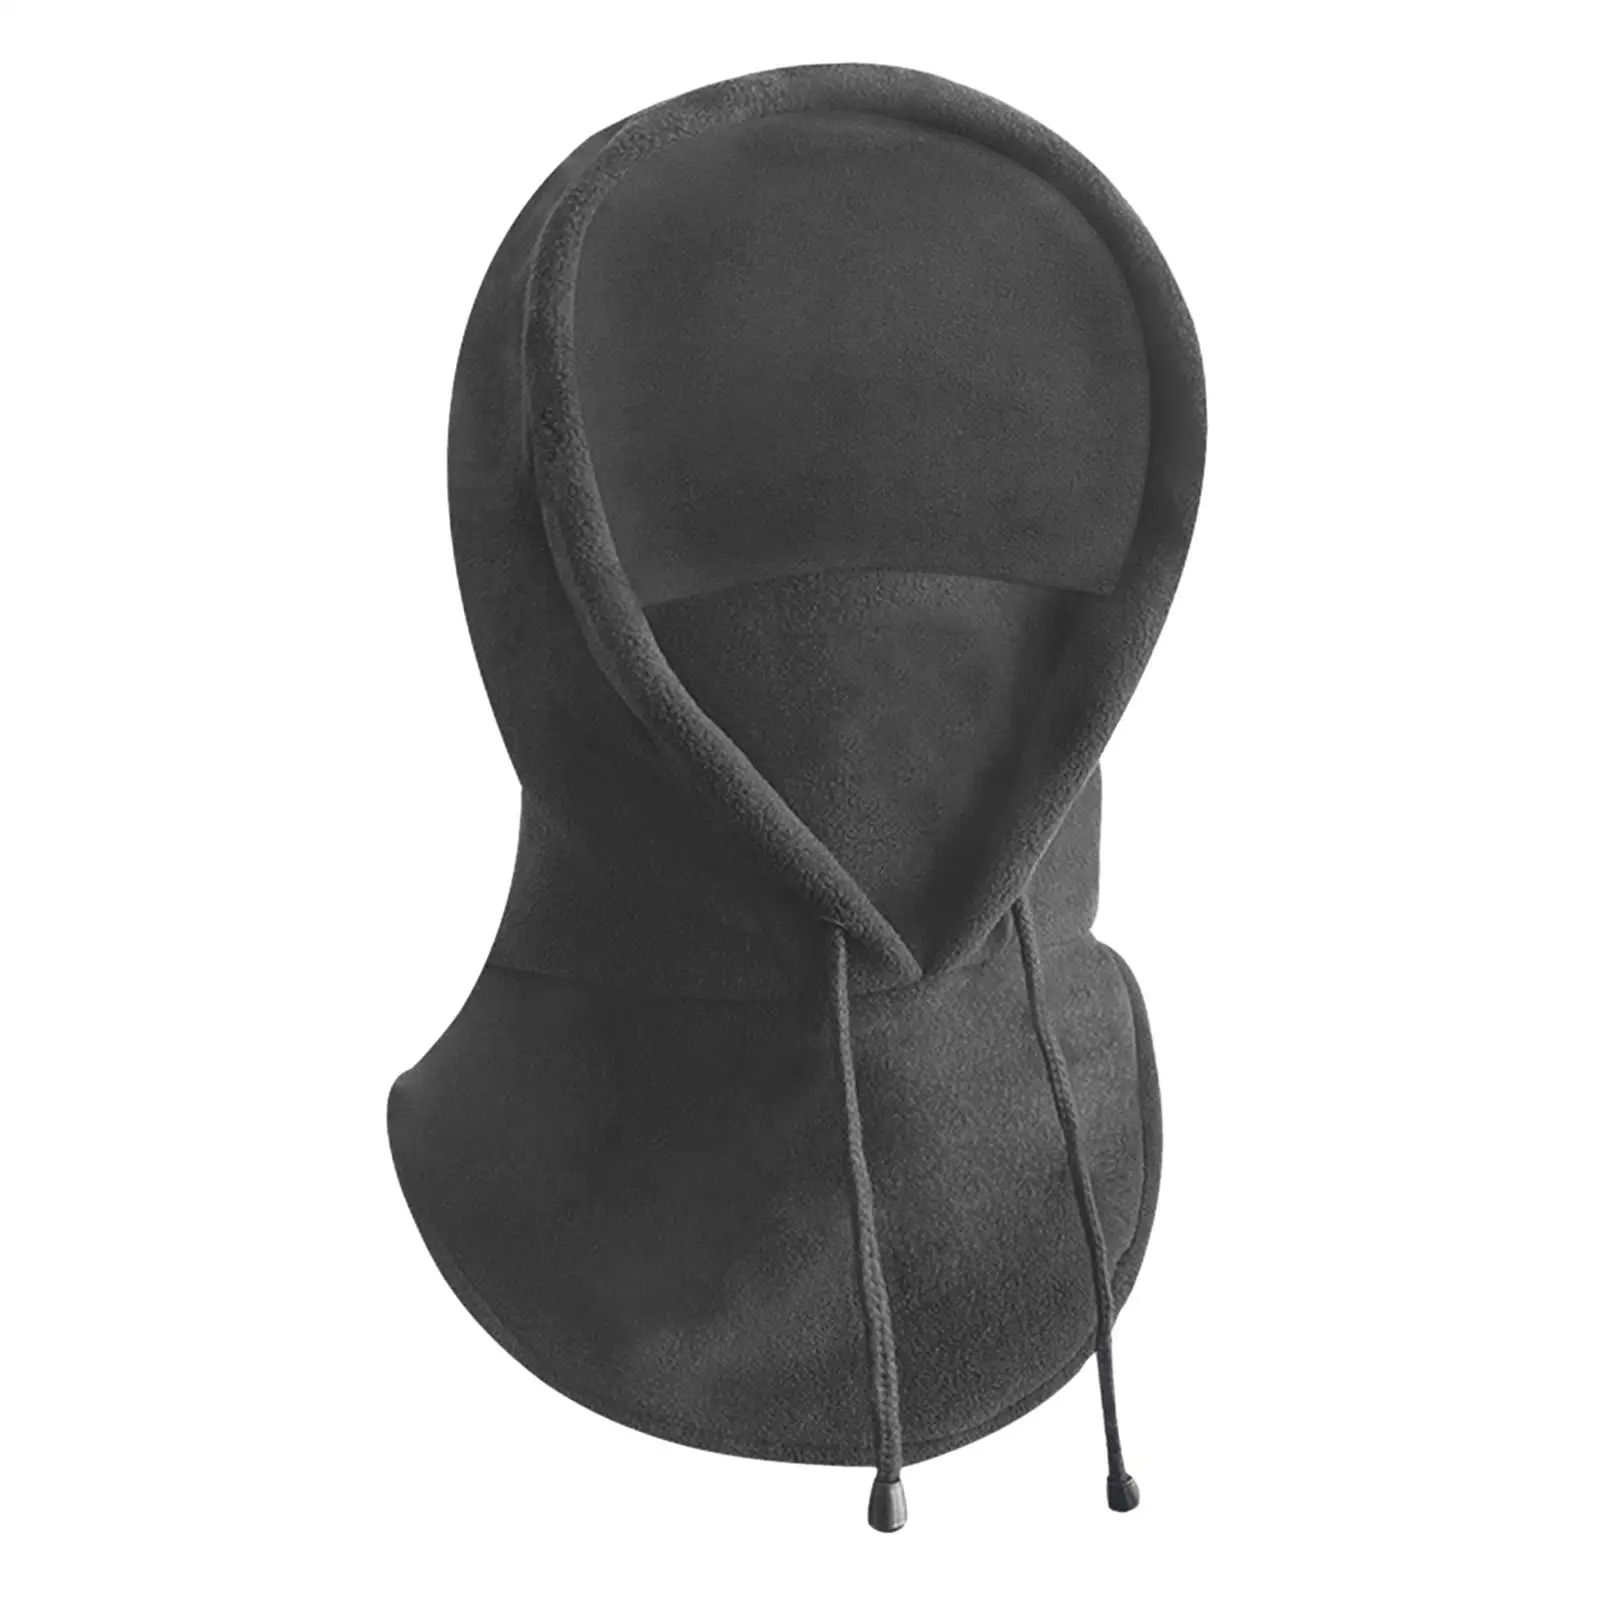 Warm Face Cover Hat Cap Scarf Accessory Windproof Winter Sports Cap for Men